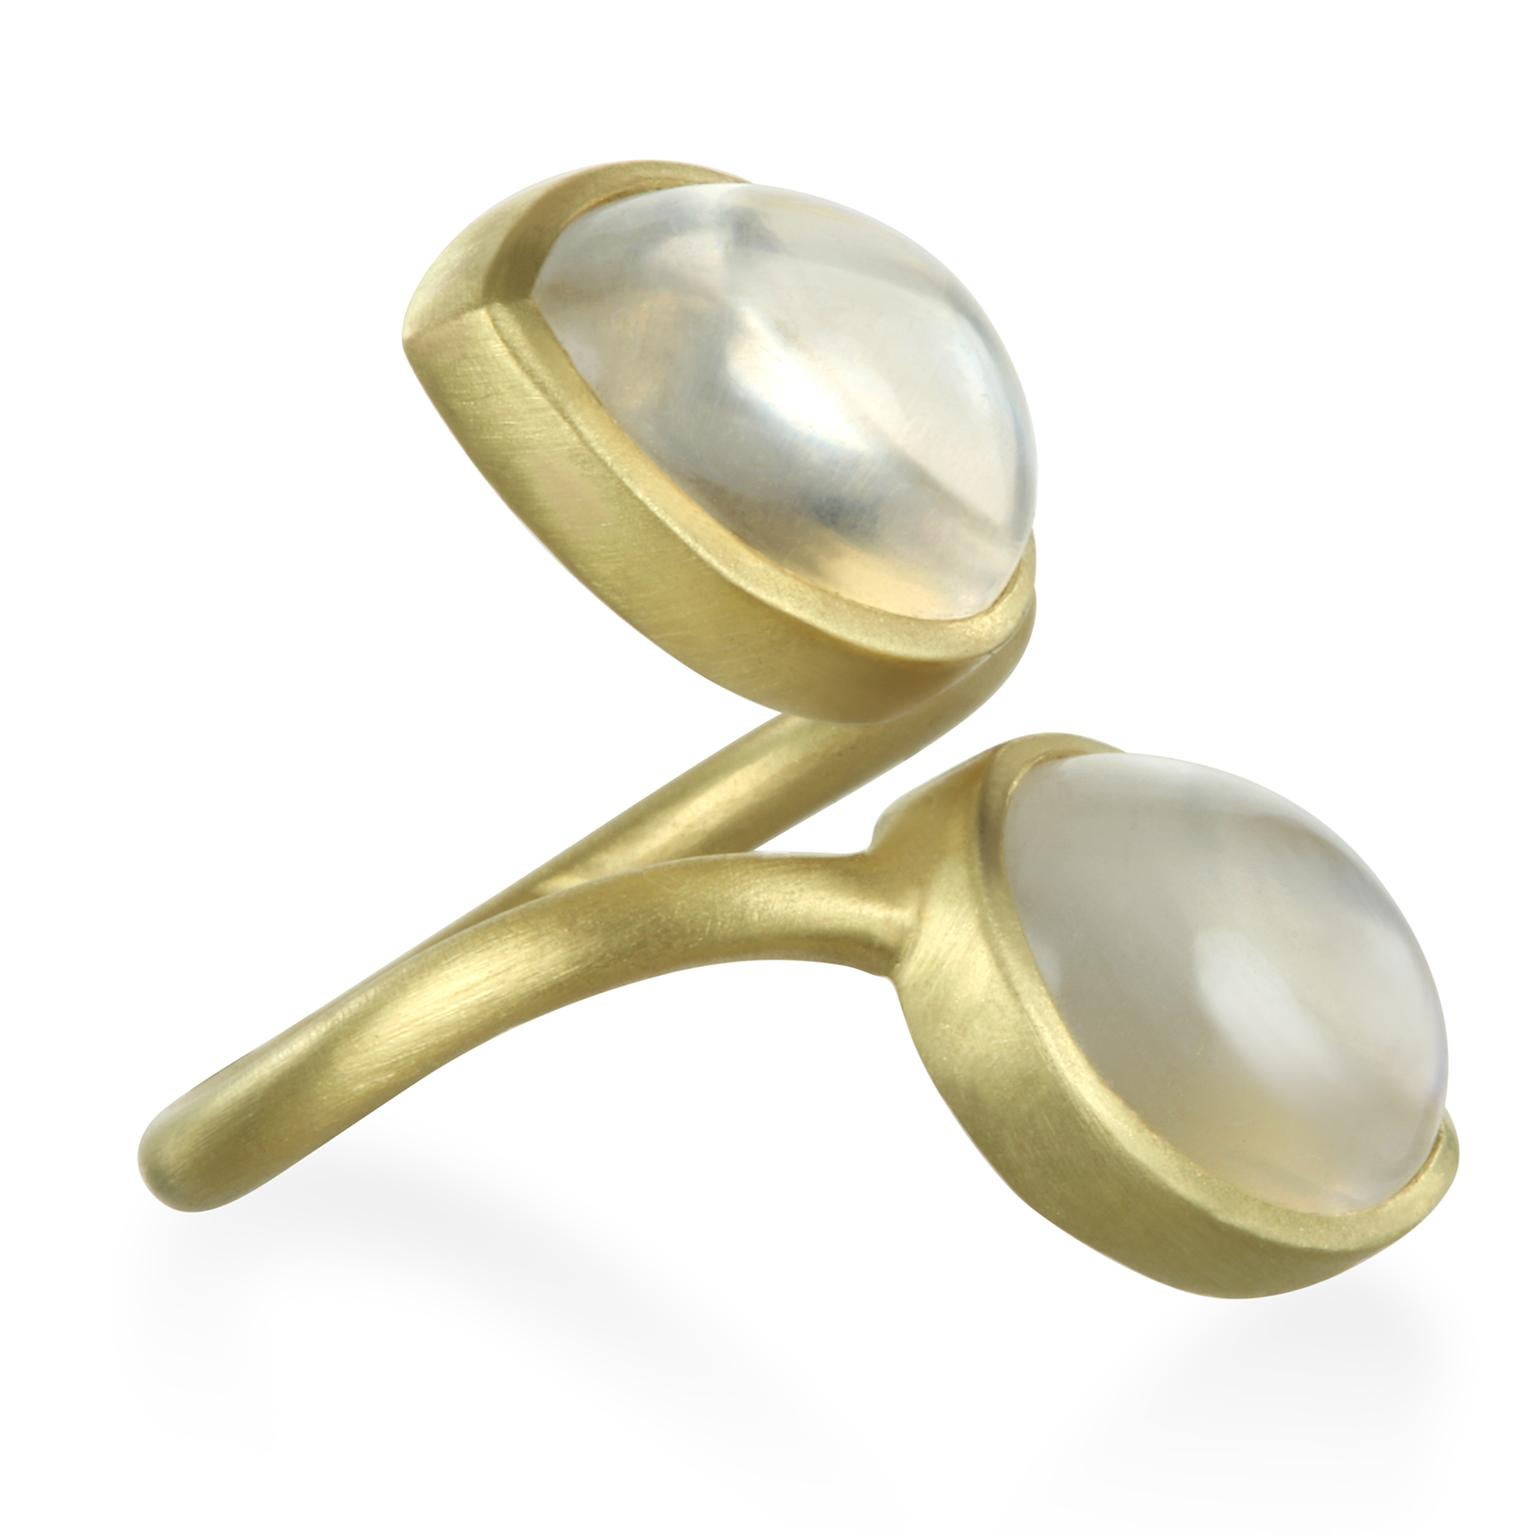 This bold and beautiful 18k Gold Double Pear Shape Moonstone Bezel Ring makes quite a statement. The matte gold enhances the moonstones striking rainbow effect. Featuring matched luminescent moonstone cabochons, the shape and polish of the stones